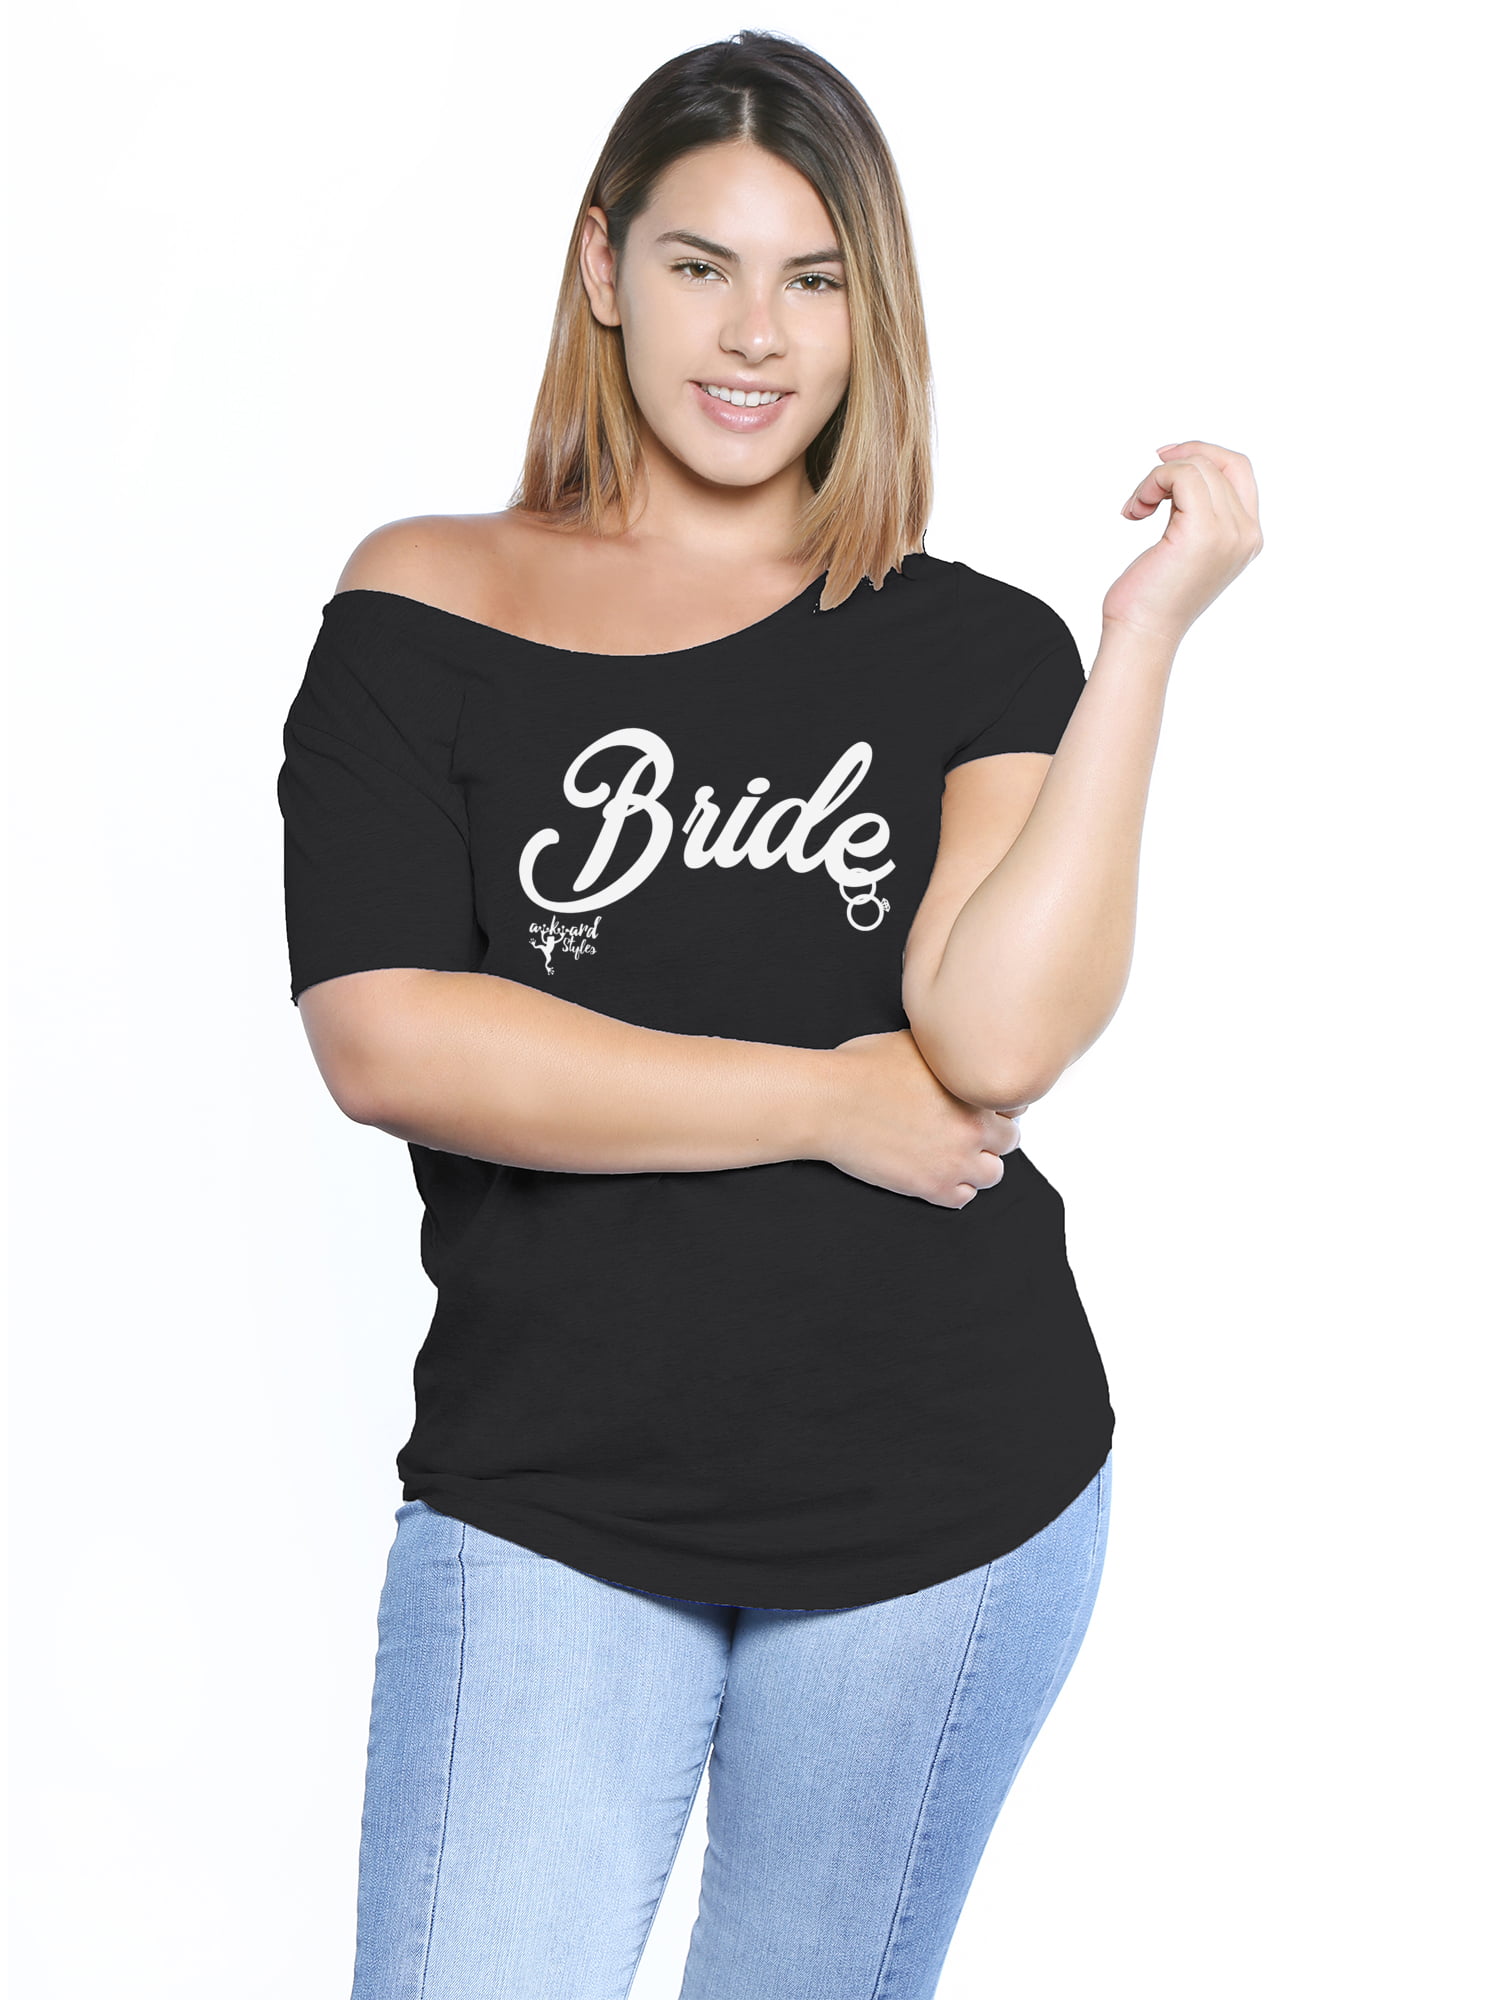 Outdoor Bachelorette Party Shirt Wild and Free Group T Shirts for Bridal Party Bride to Be Camping Bachelorette Outdoor Wedding